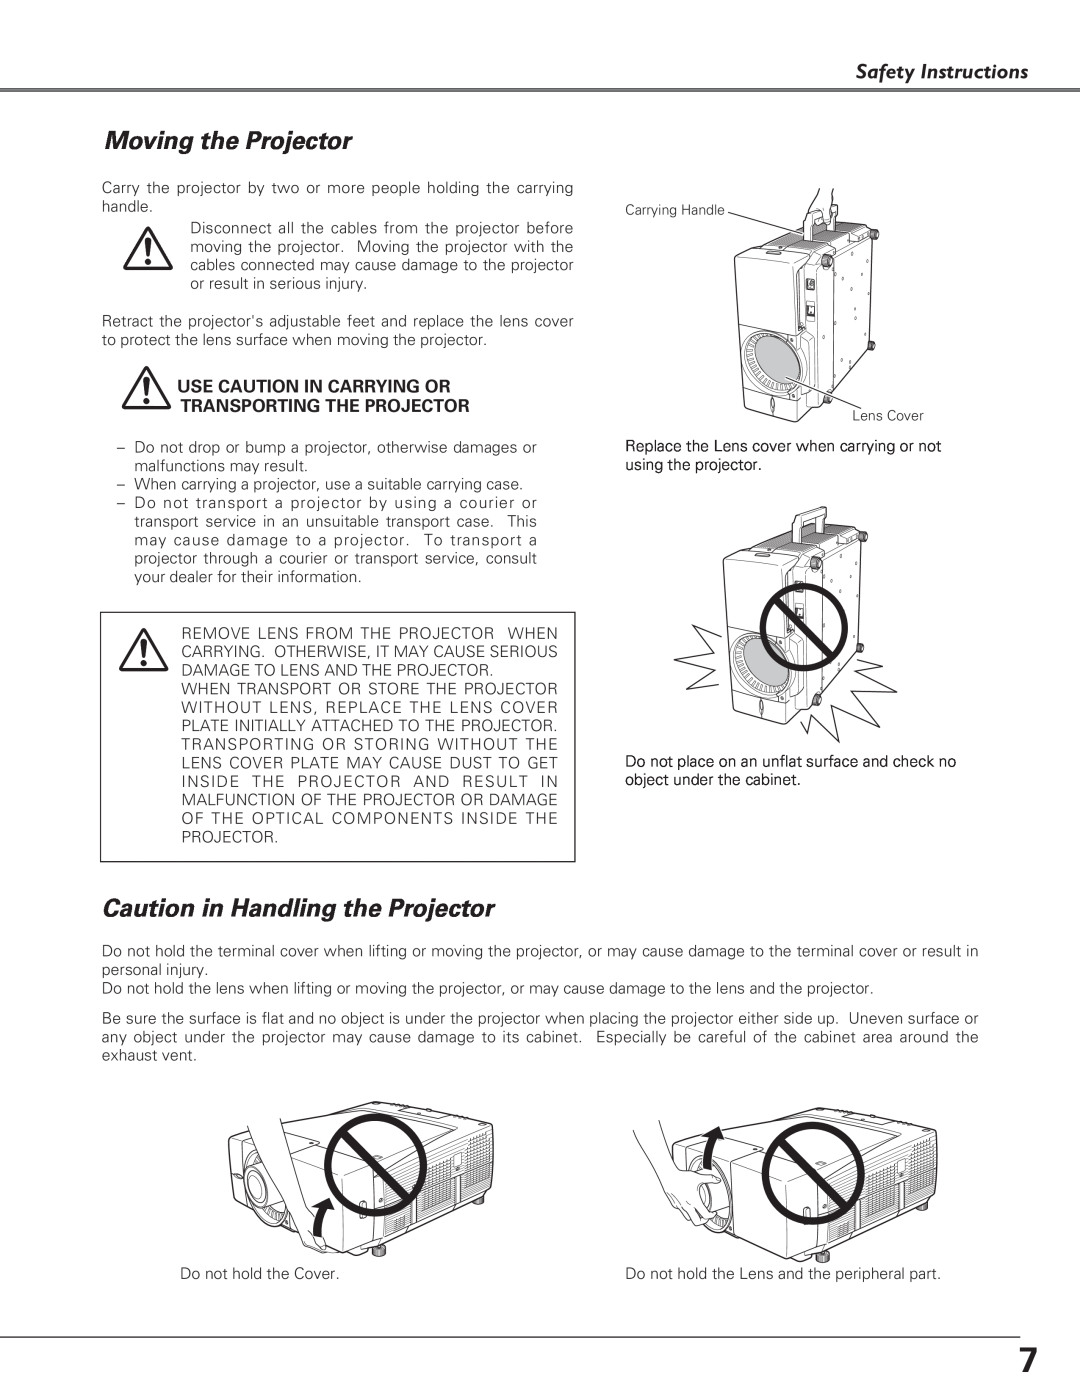 Eiki LC-SX6, LC-X6 owner manual Moving the Projector, Caution in Handling the Projector, Safety Instructions 